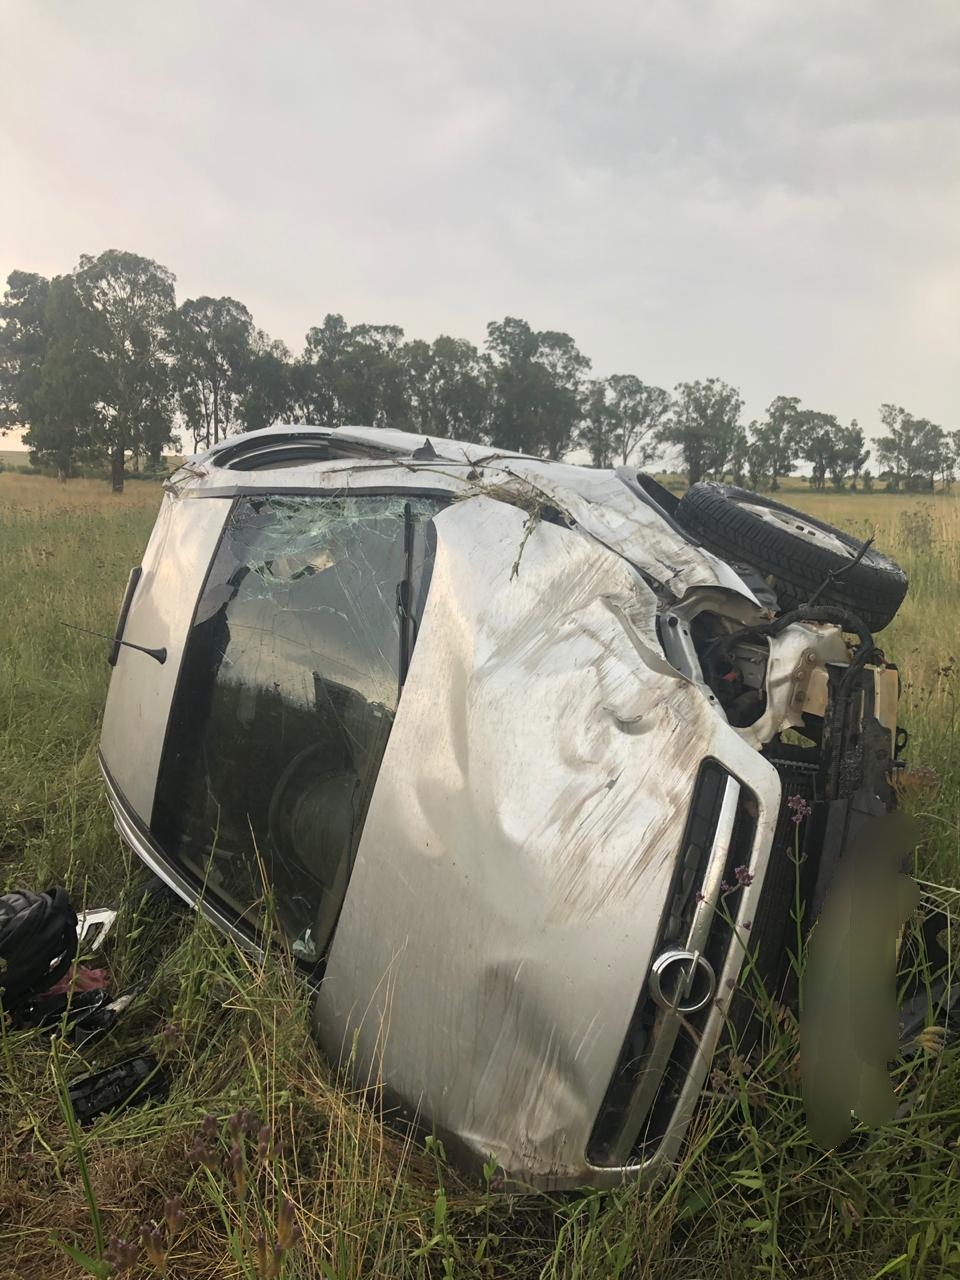 One killed in bakkie rollover on the R54 Villiers Road near Vaal Marina.